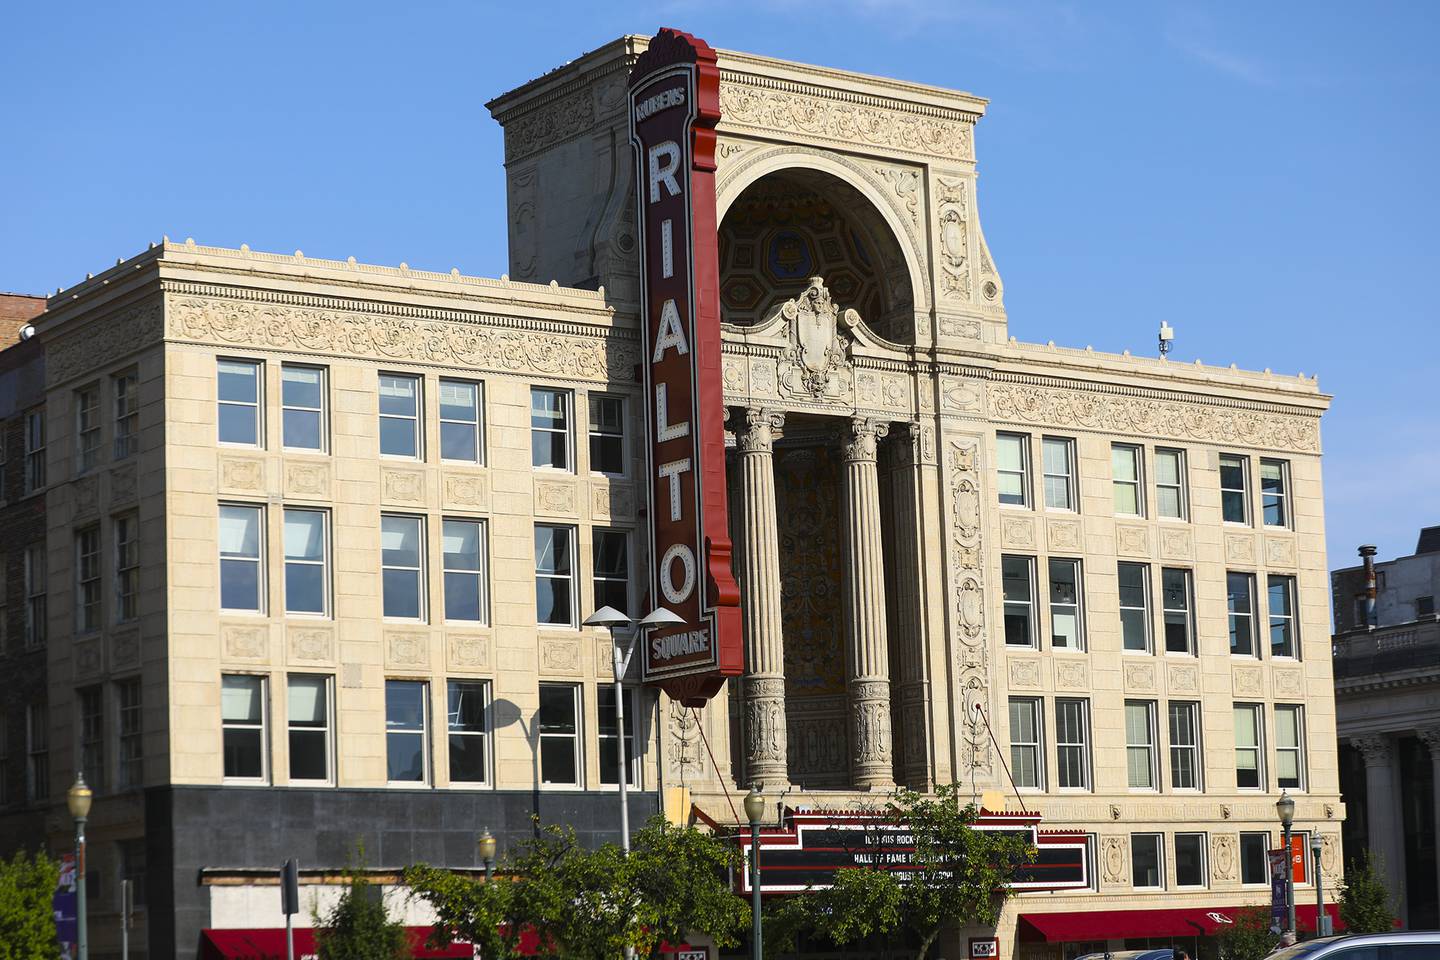 The sun sets over the Rialto Square Theater on Tuesday, Aug. 31, 2021, in Joliet, Illinois.